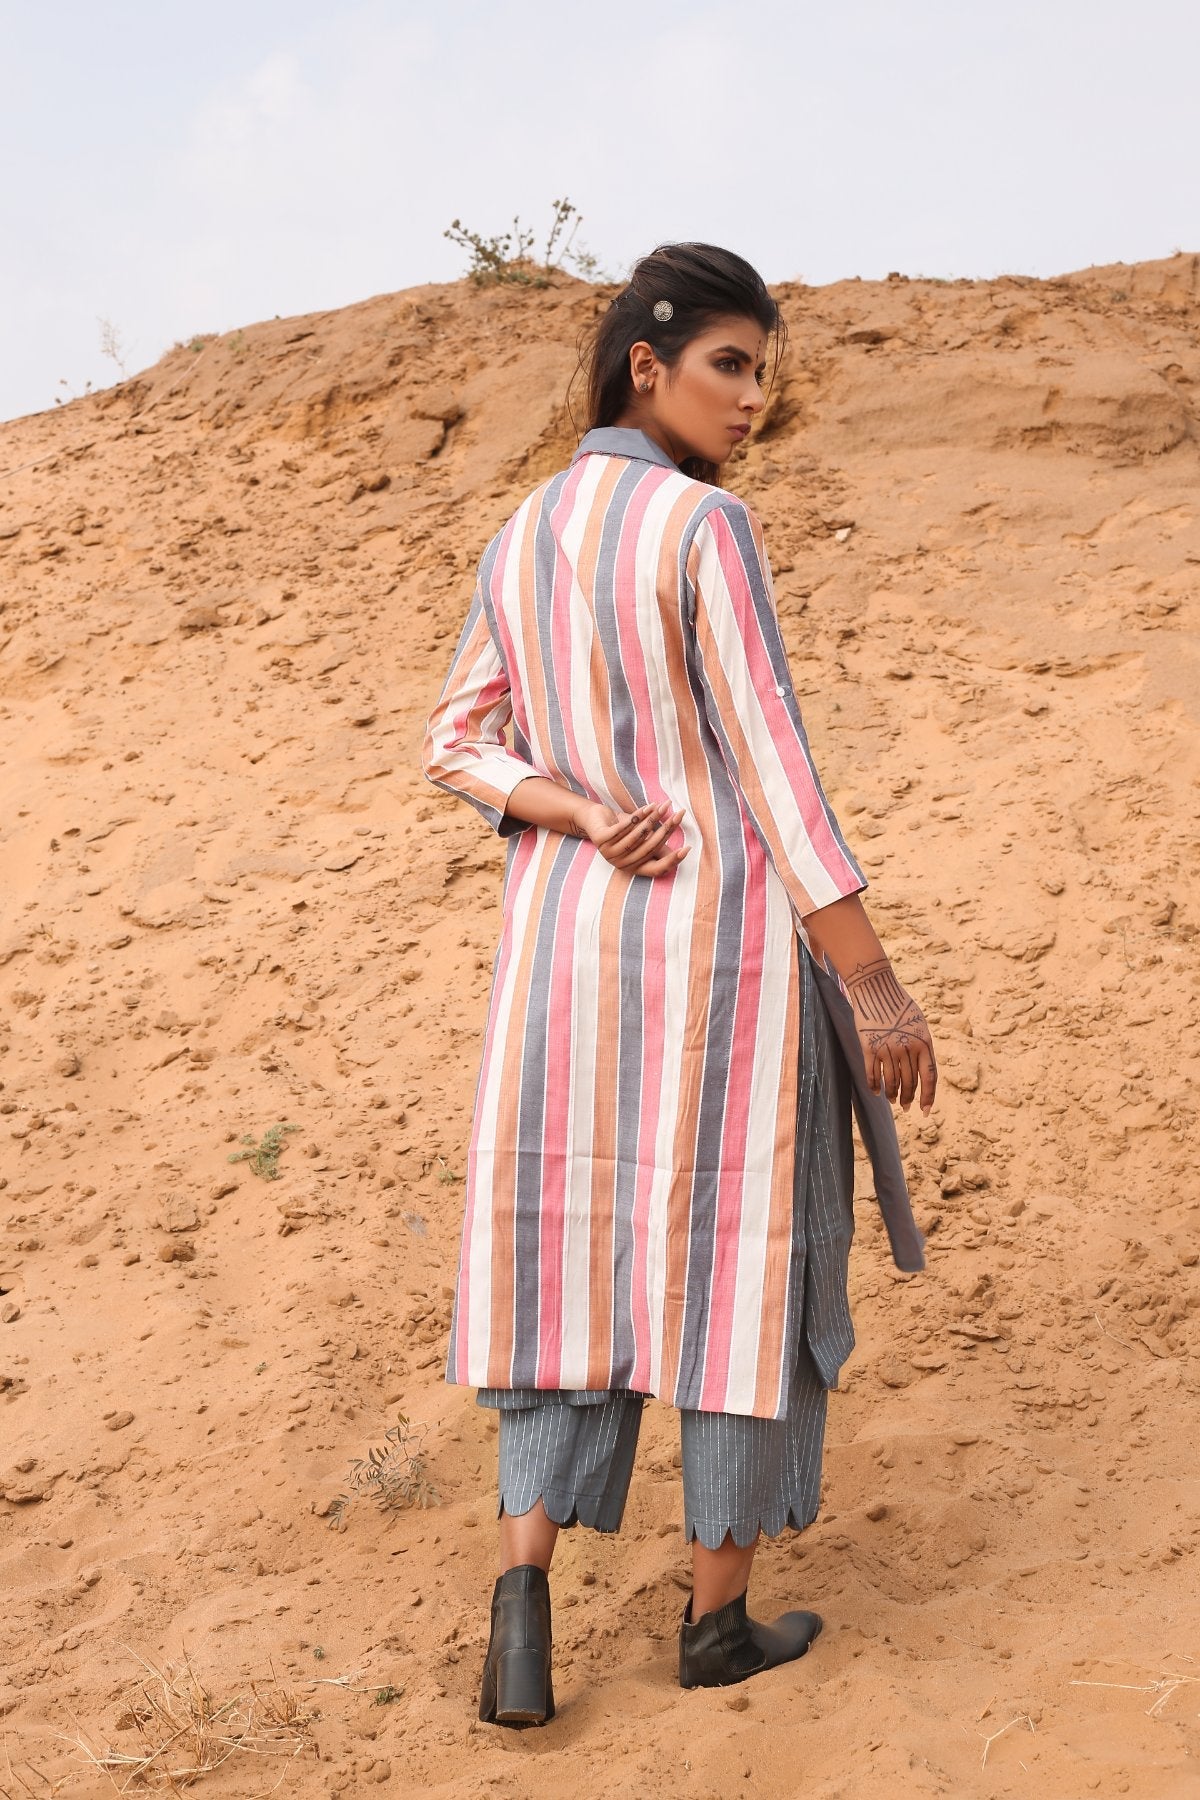 Multi-Color Striped Cape With Kurta And Pants - Set Of Three at Kamakhyaa by Keva. This item is Cape, Co-ord Sets, Cotton, Cotton Lurex, Desert Rose, Multicolor, Natural, Relaxed Fit, Resort Wear, Stripes, Travel, Travel Co-ords, Womenswear